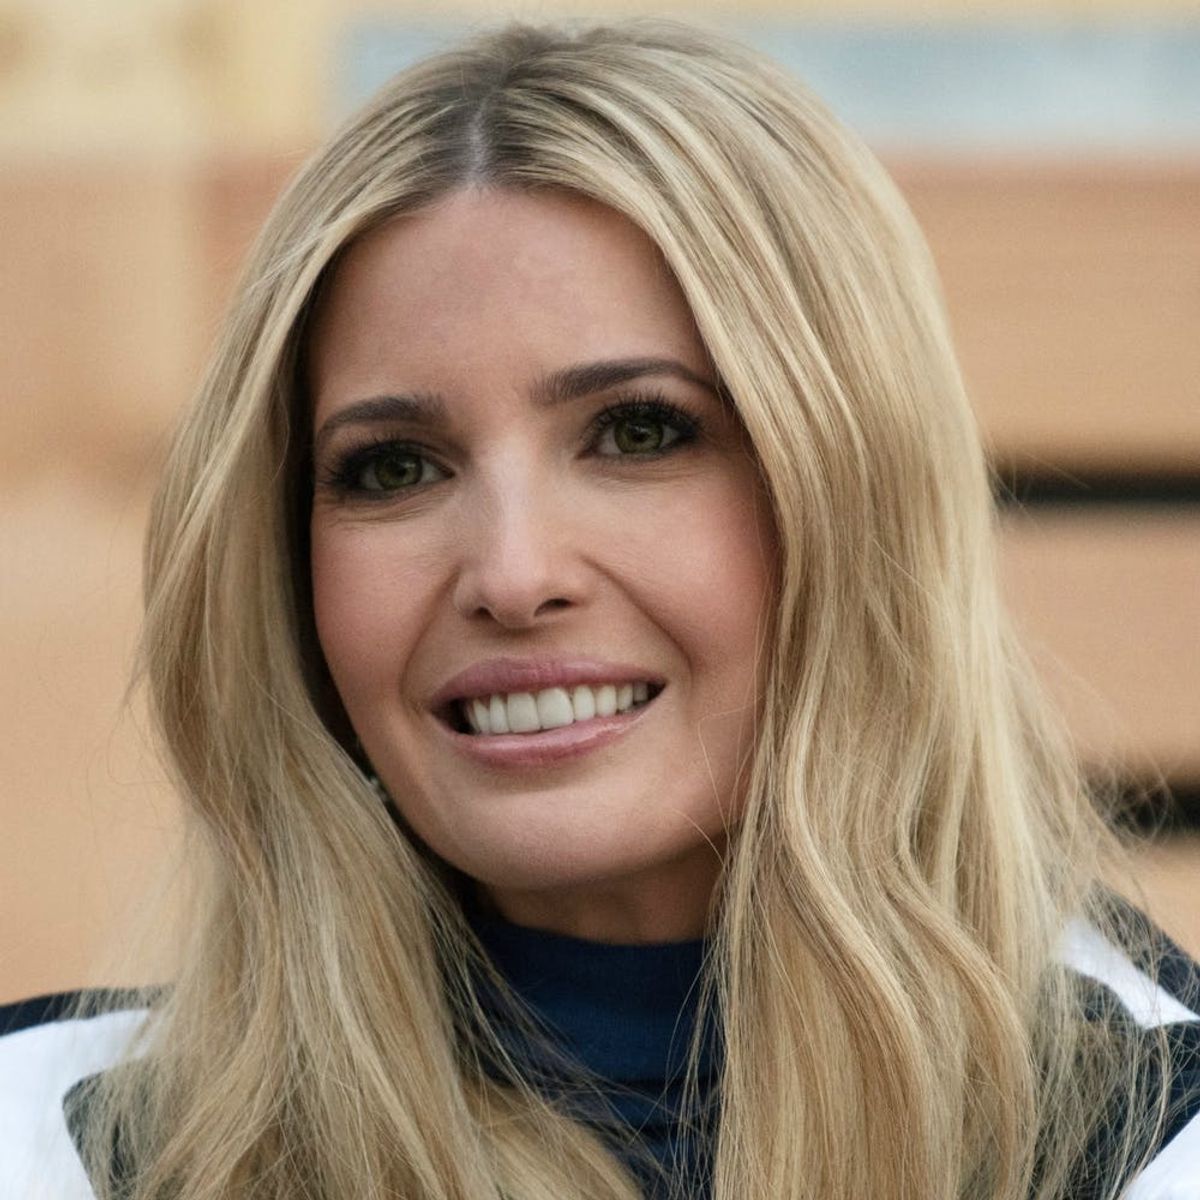 Ivanka Trump’s Inclusion on Forbes ‘100 Most Powerful Women’ List Conflates Visibility With Influence